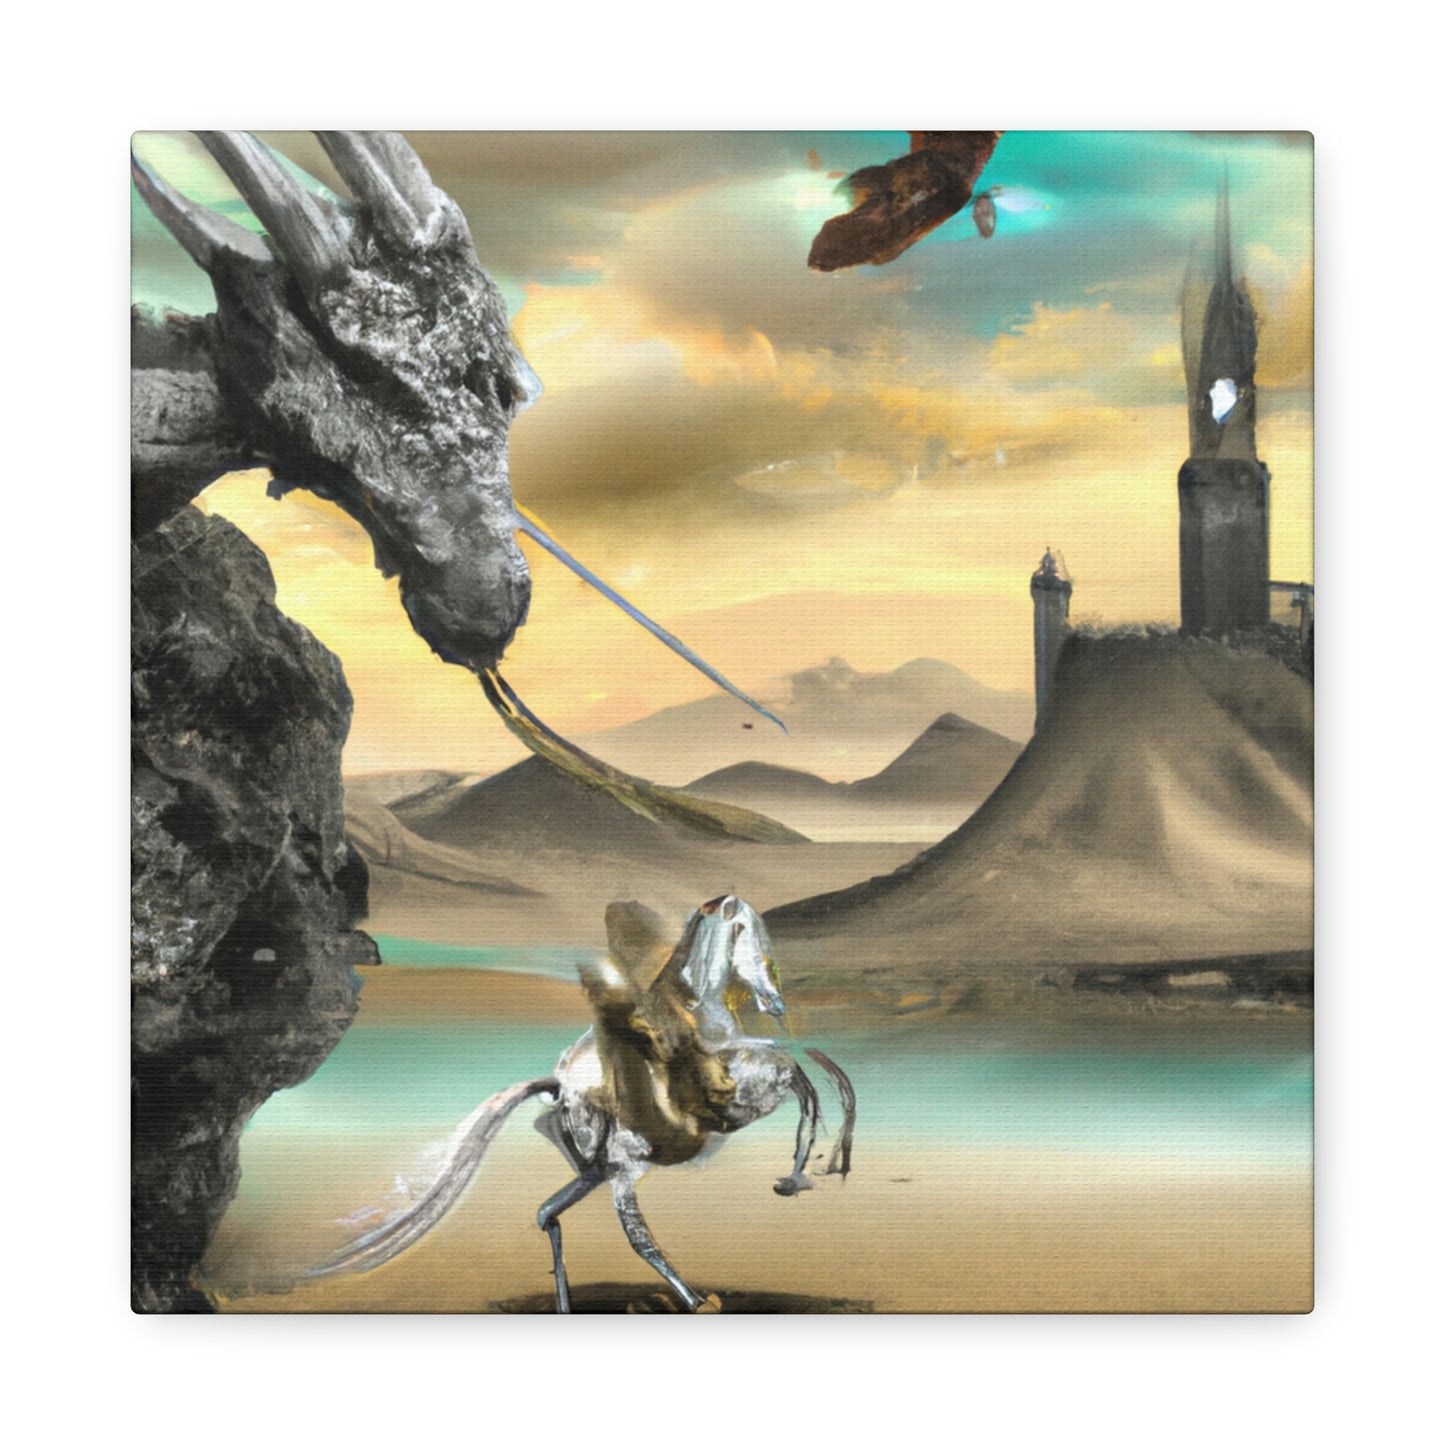 The Knight and the Dragon's Throne - The Alien Canva